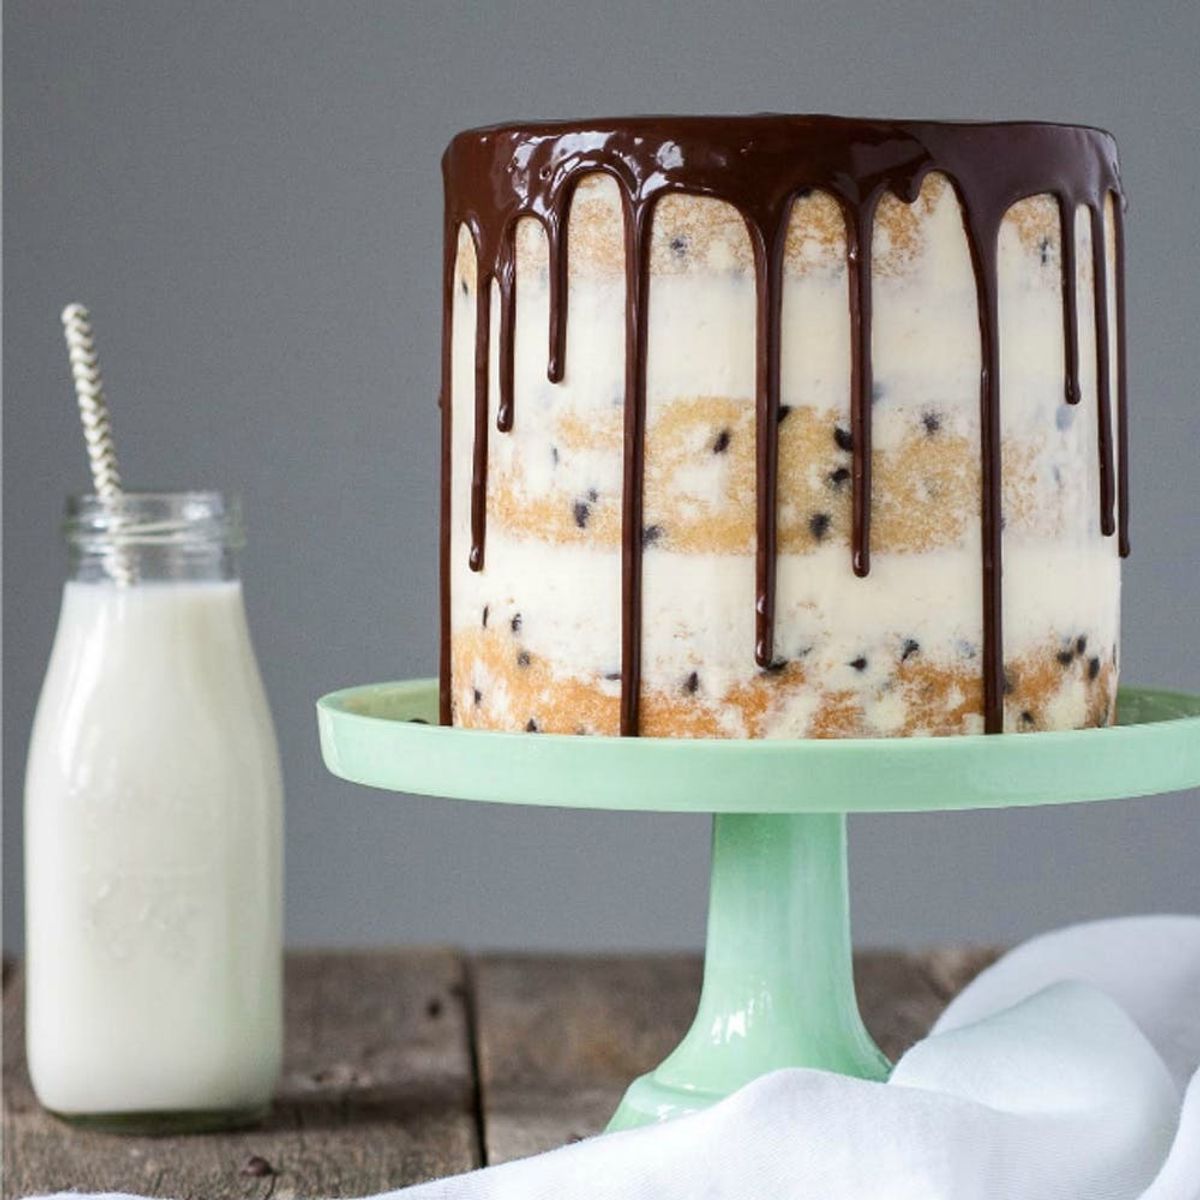 18 Layered Cookie Cakes Guaranteed to Rack Up Likes